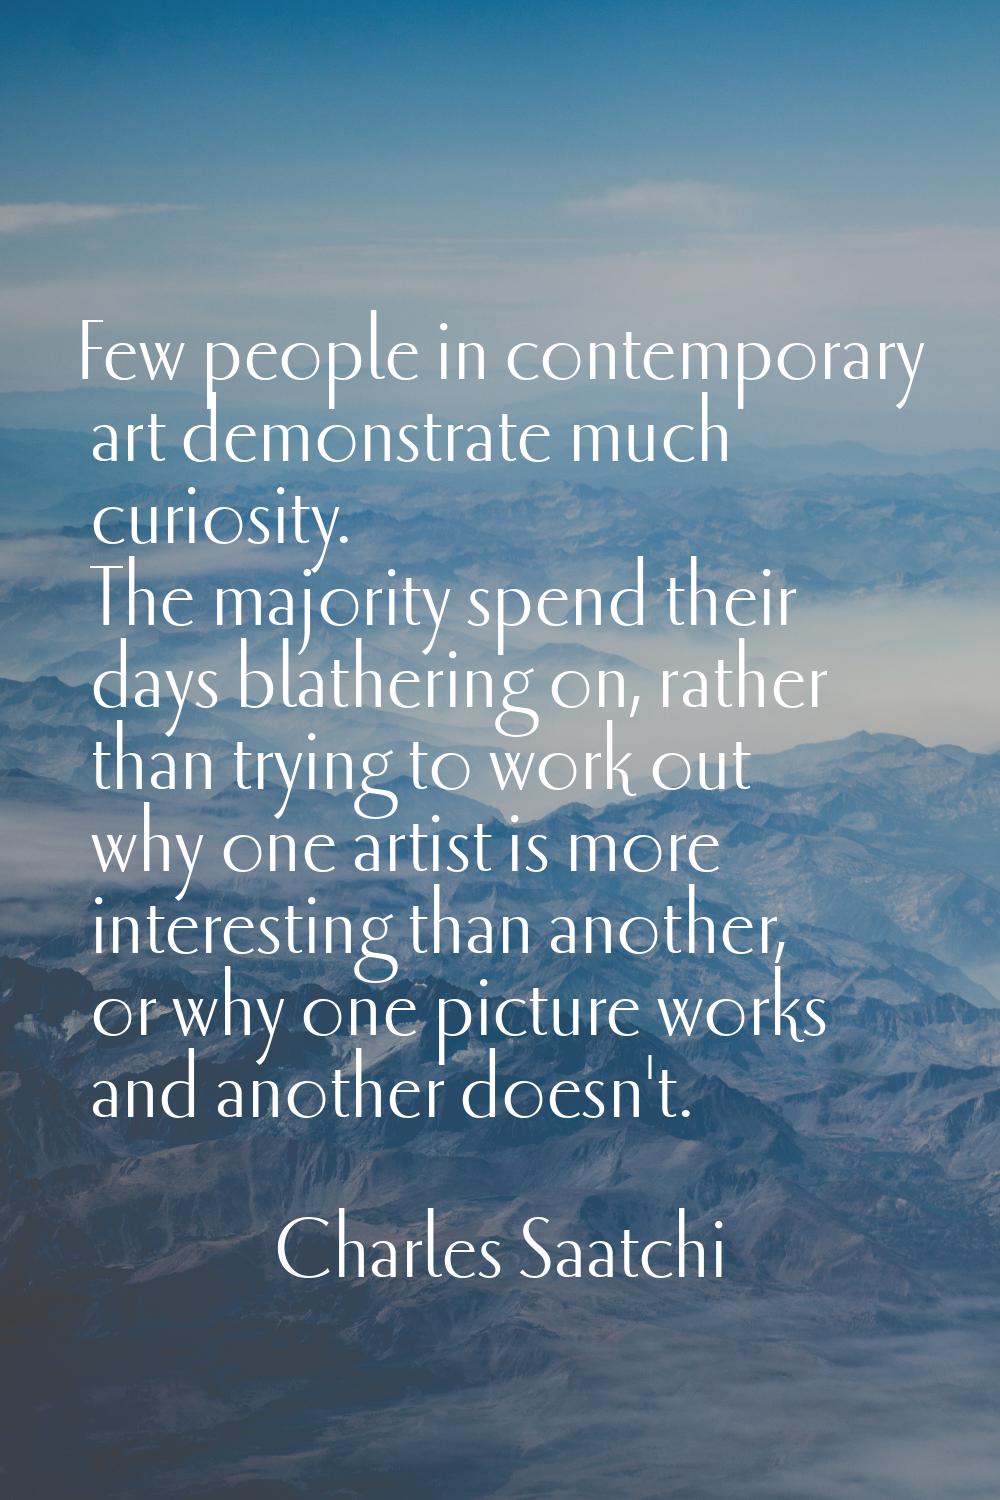 Few people in contemporary art demonstrate much curiosity. The majority spend their days blathering